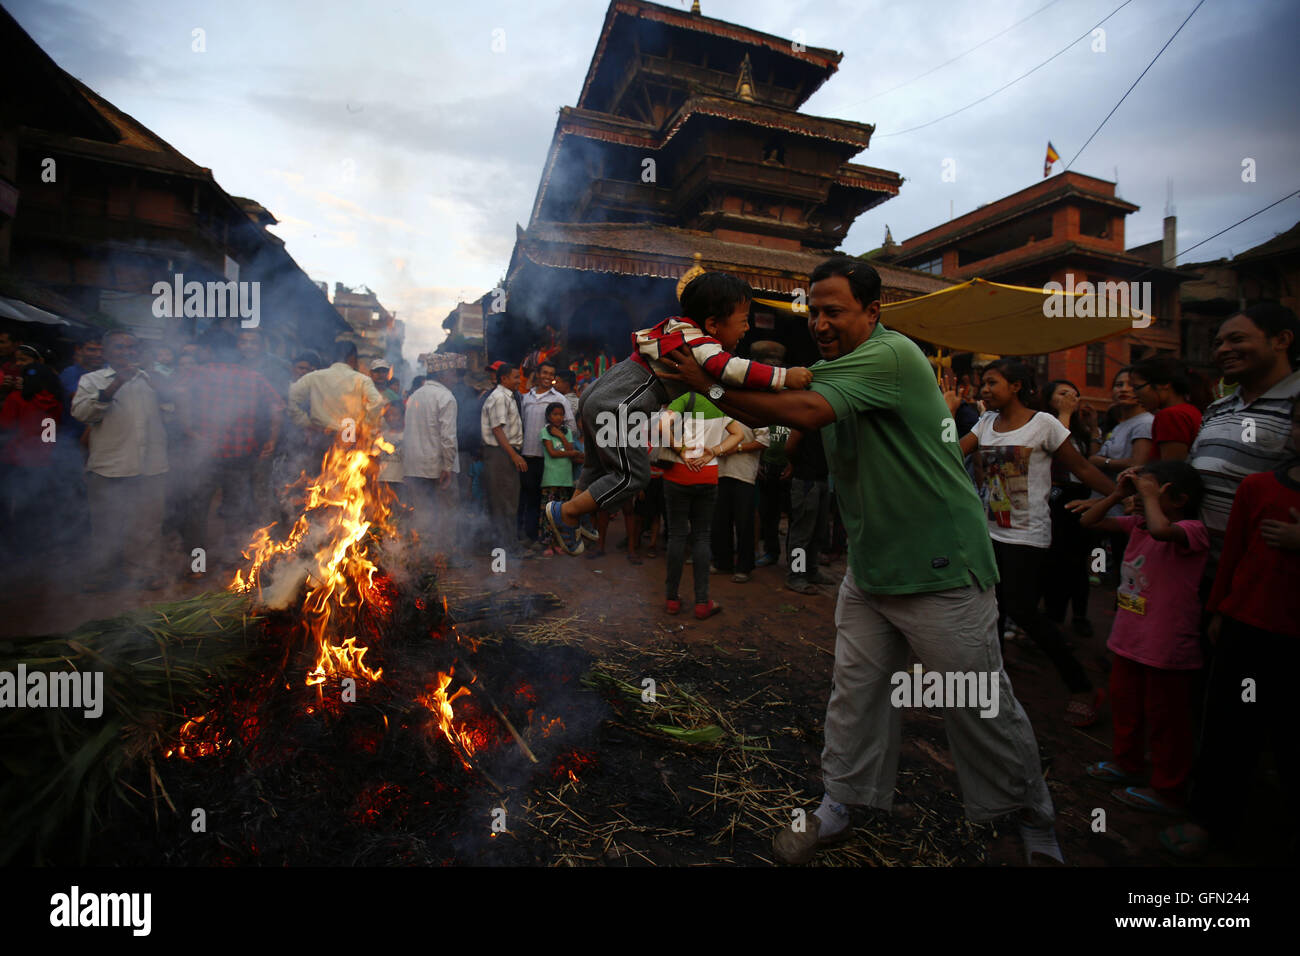 Bhaktapur, Nepal. 1st Aug, 2016. A Nepalese man draws his child towards fire of burnt straw effigy of mythical demon Ghanta Karna as celebrations for his death during the Hindu festival of Gathe Mangal in Dattatreya Square, Bhaktapur, Nepal on Monday, August 1, 16. It is believed according to myths that by burning the demon rid evil spirits. © Skanda Gautam/ZUMA Wire/Alamy Live News Stock Photo